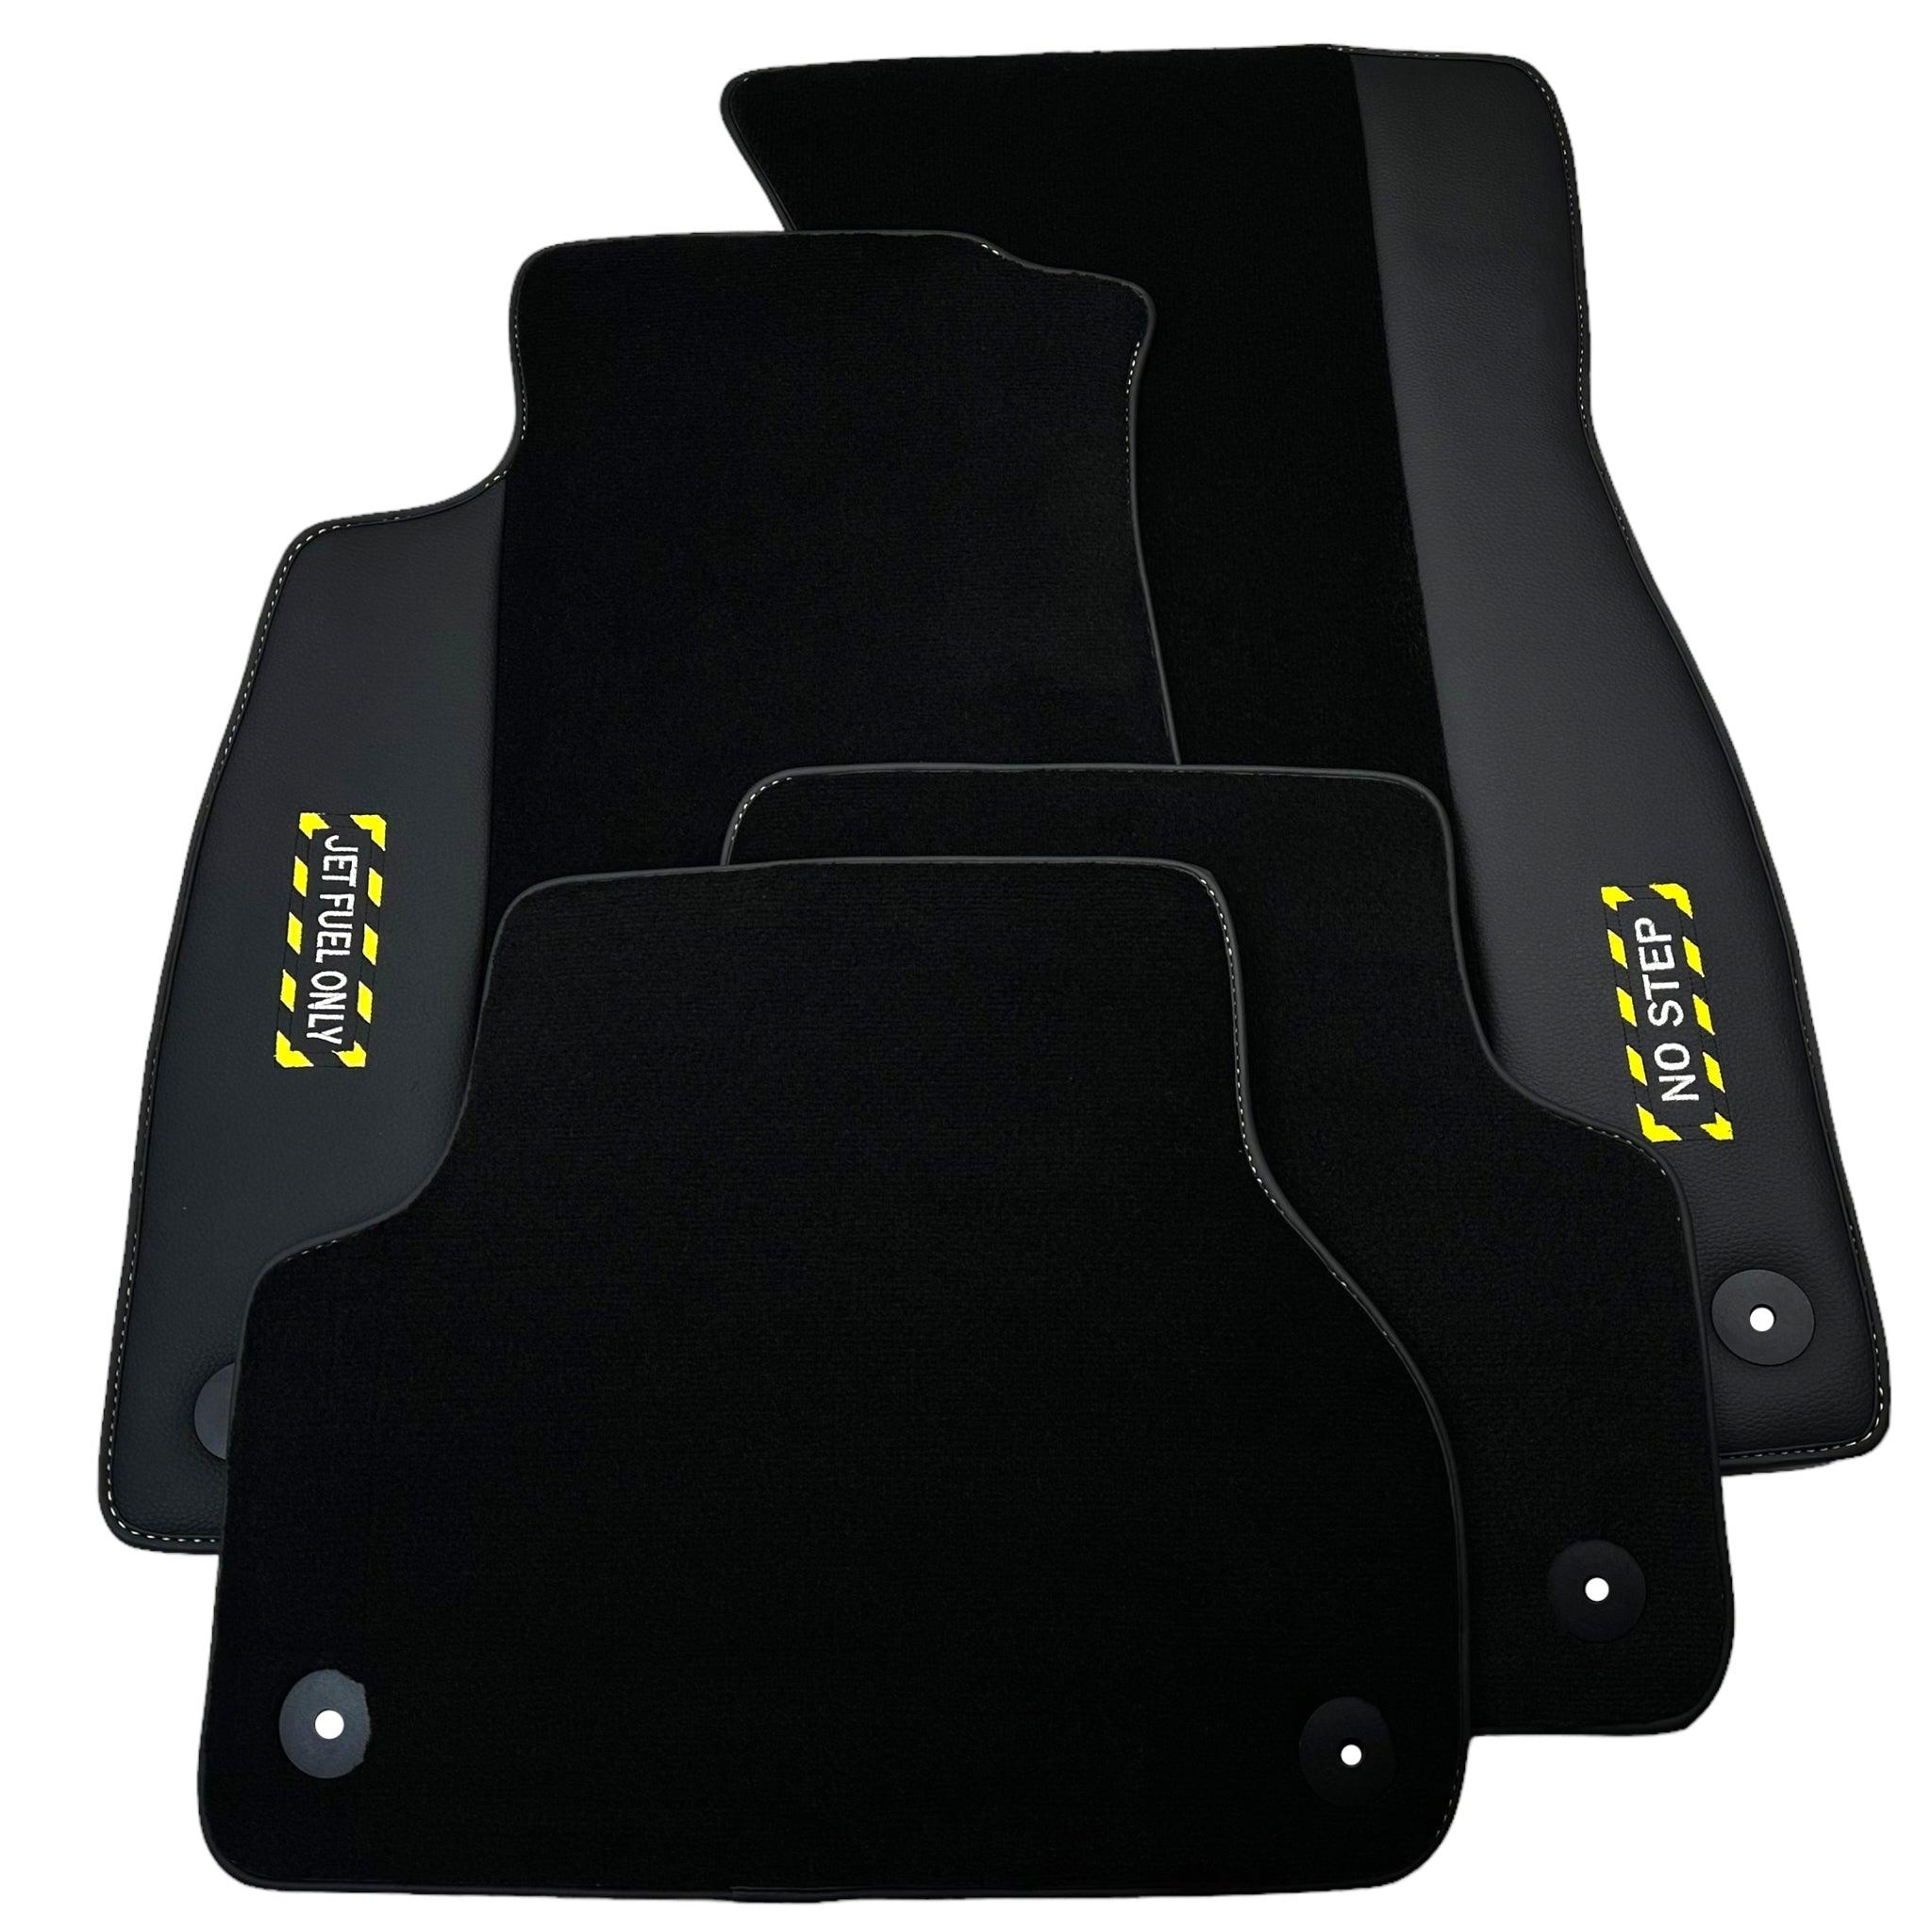 Black Floor Mats for Audi A4 - B7 Convertible (2006-2009) | Fighter Jet Edition